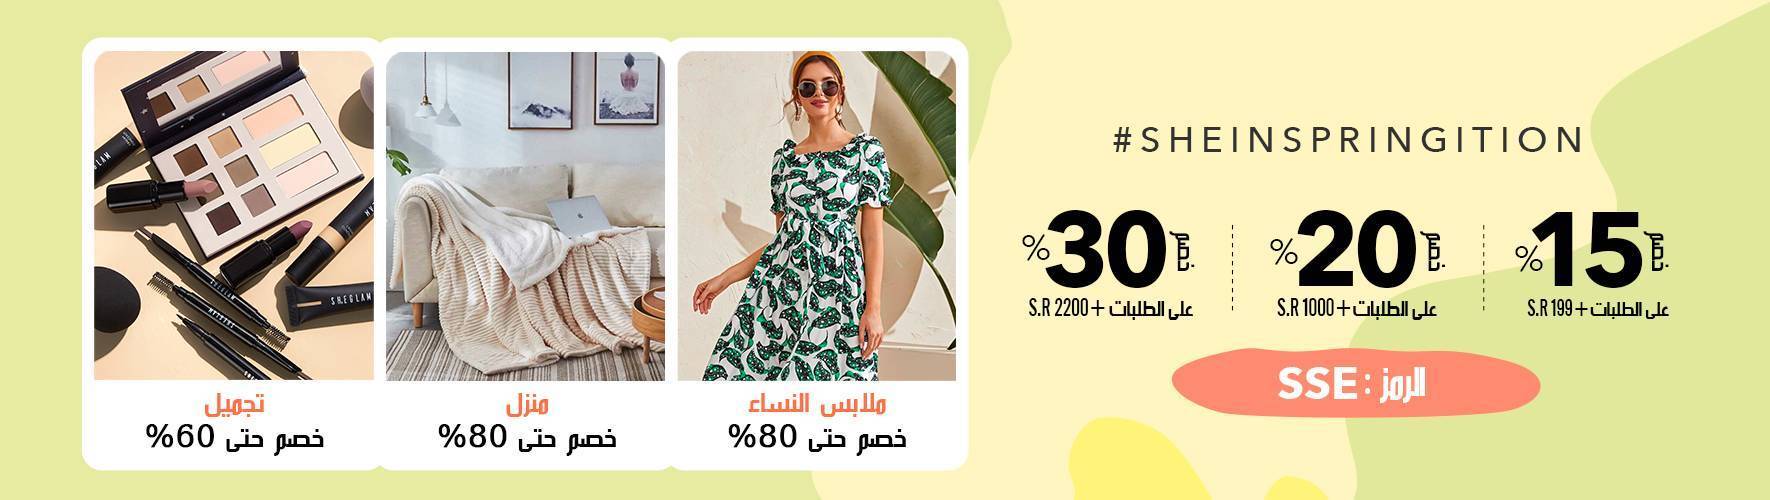 Shein Coupon Up To 30% OFF + Up To 80% OFF Sale | Shein KSA 7